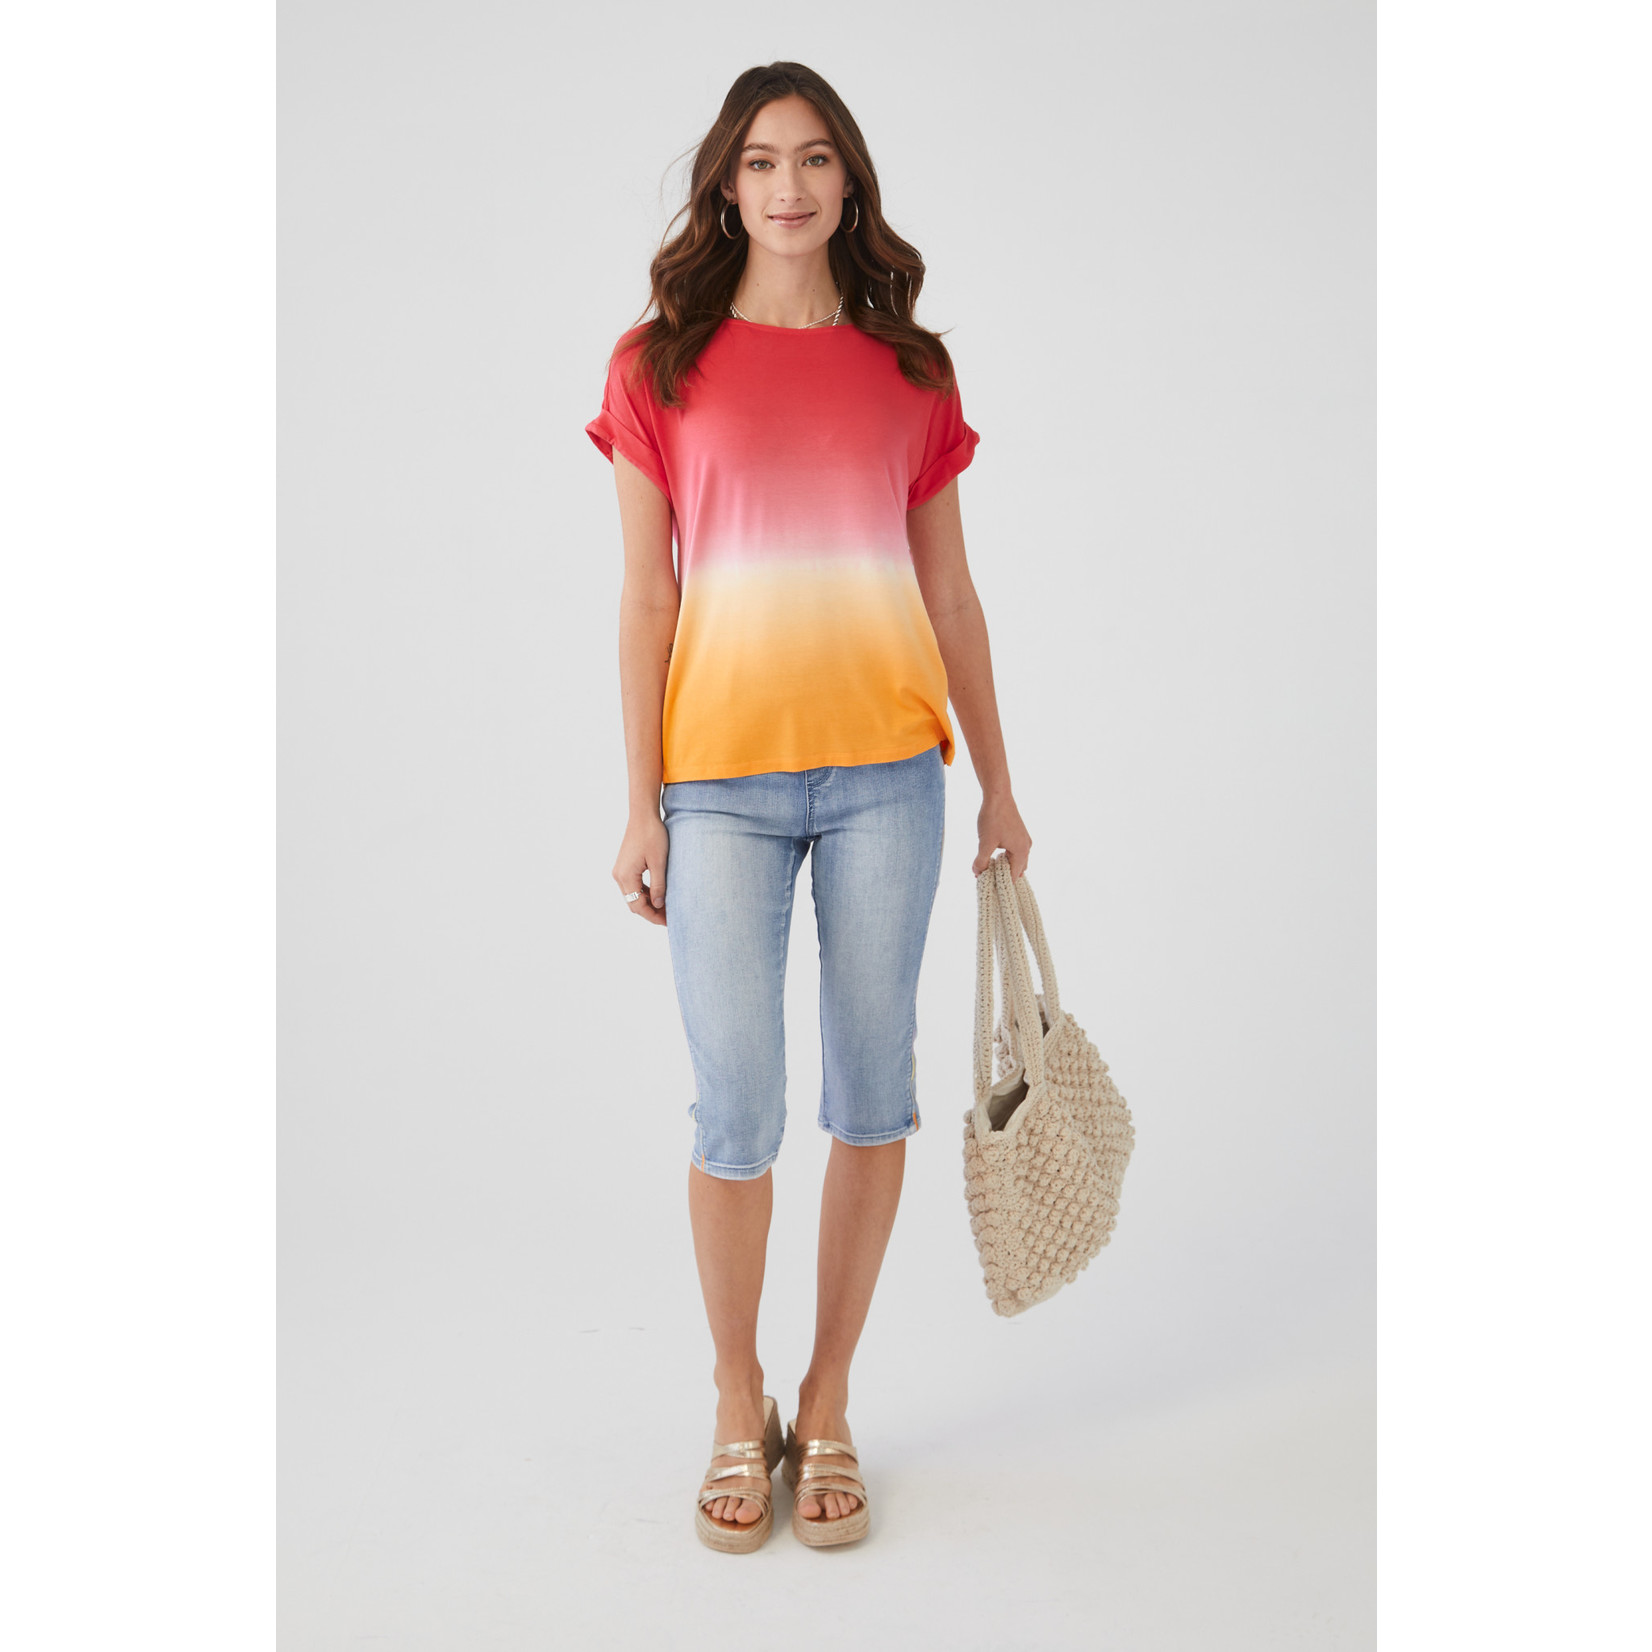 FDJ Dip Dyed Boat Neck Top